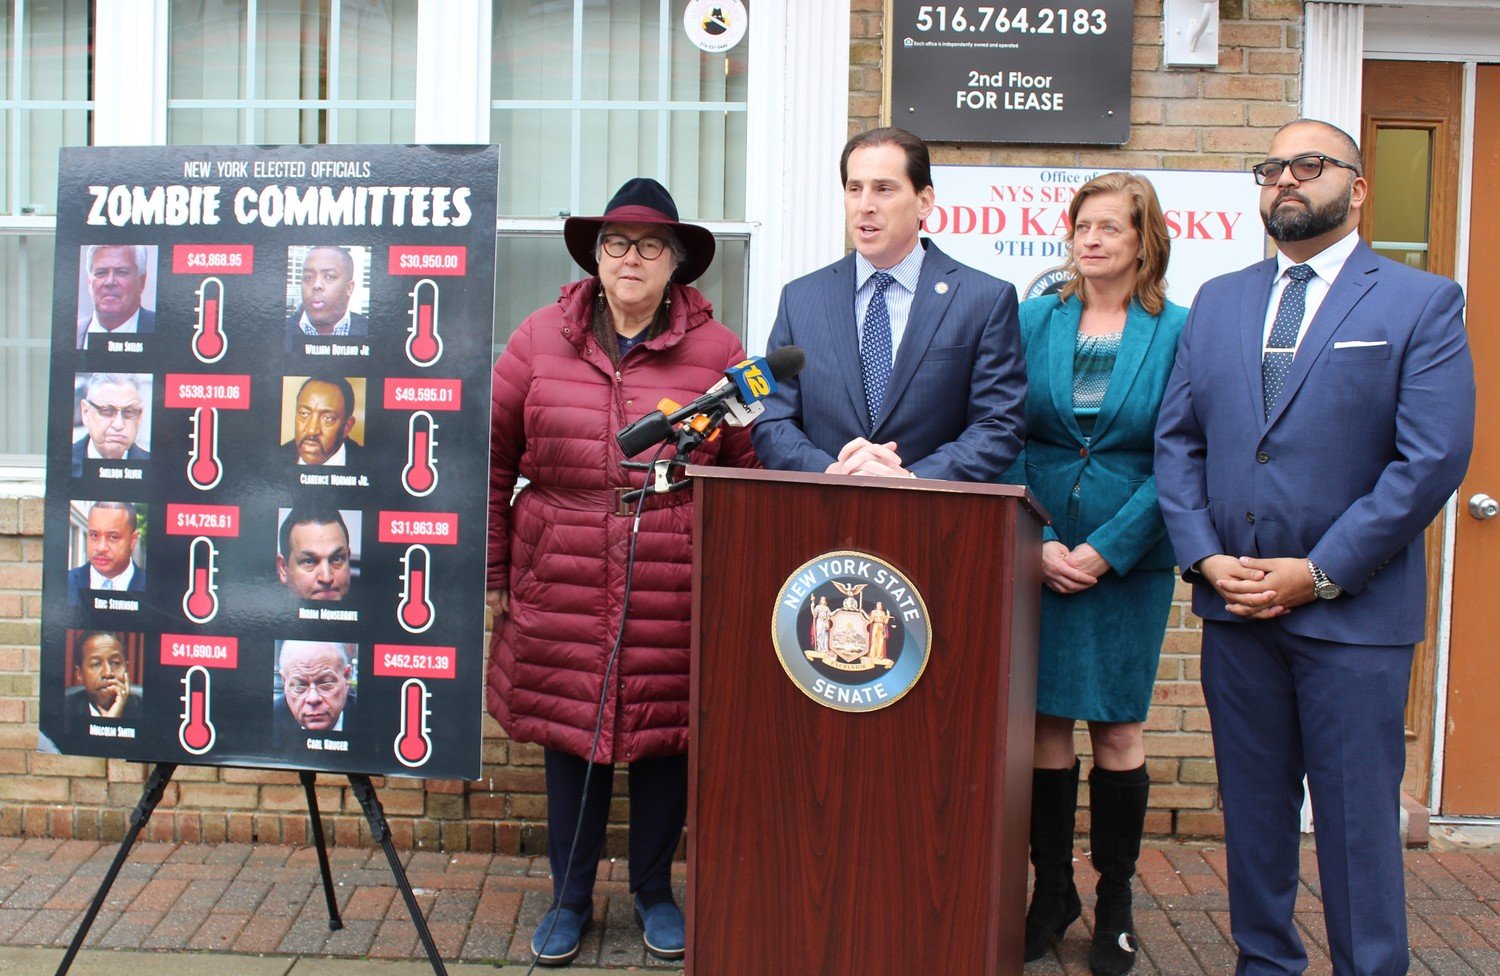 State Sen. Todd Kaminsky, at lectern, and Assemblywoman Judy Griffin, second from right, joined Senate and Assembly colleagues to support Gov. Kathy Hochul's mask mandate in schools despite Nassau County Executive Bruce Blakeman's recent executive order meant to fight those mandates.